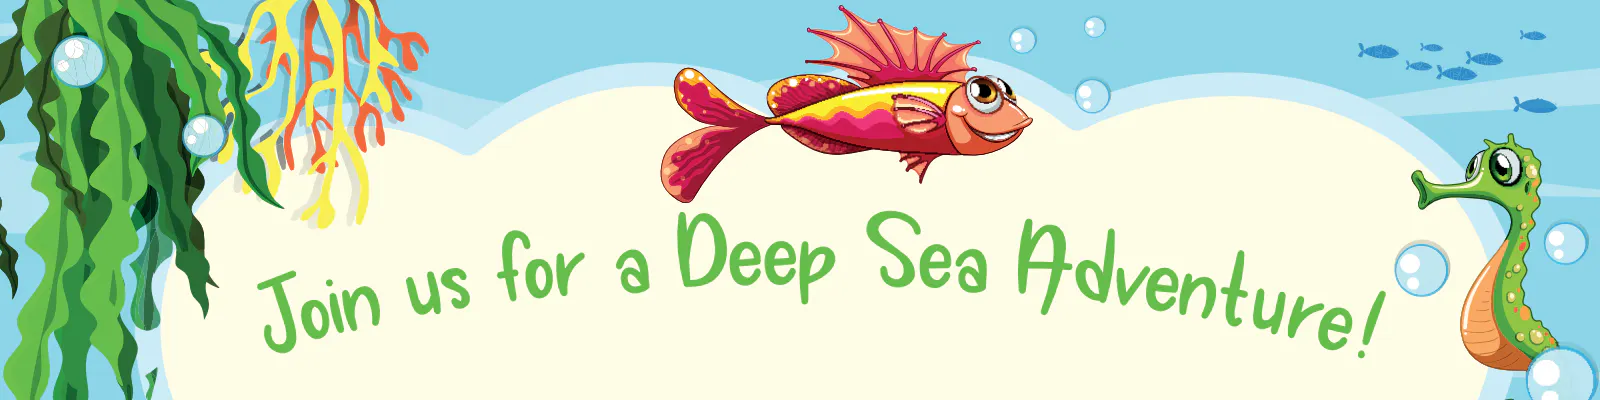 Join us for a Deep Sea Adventure!